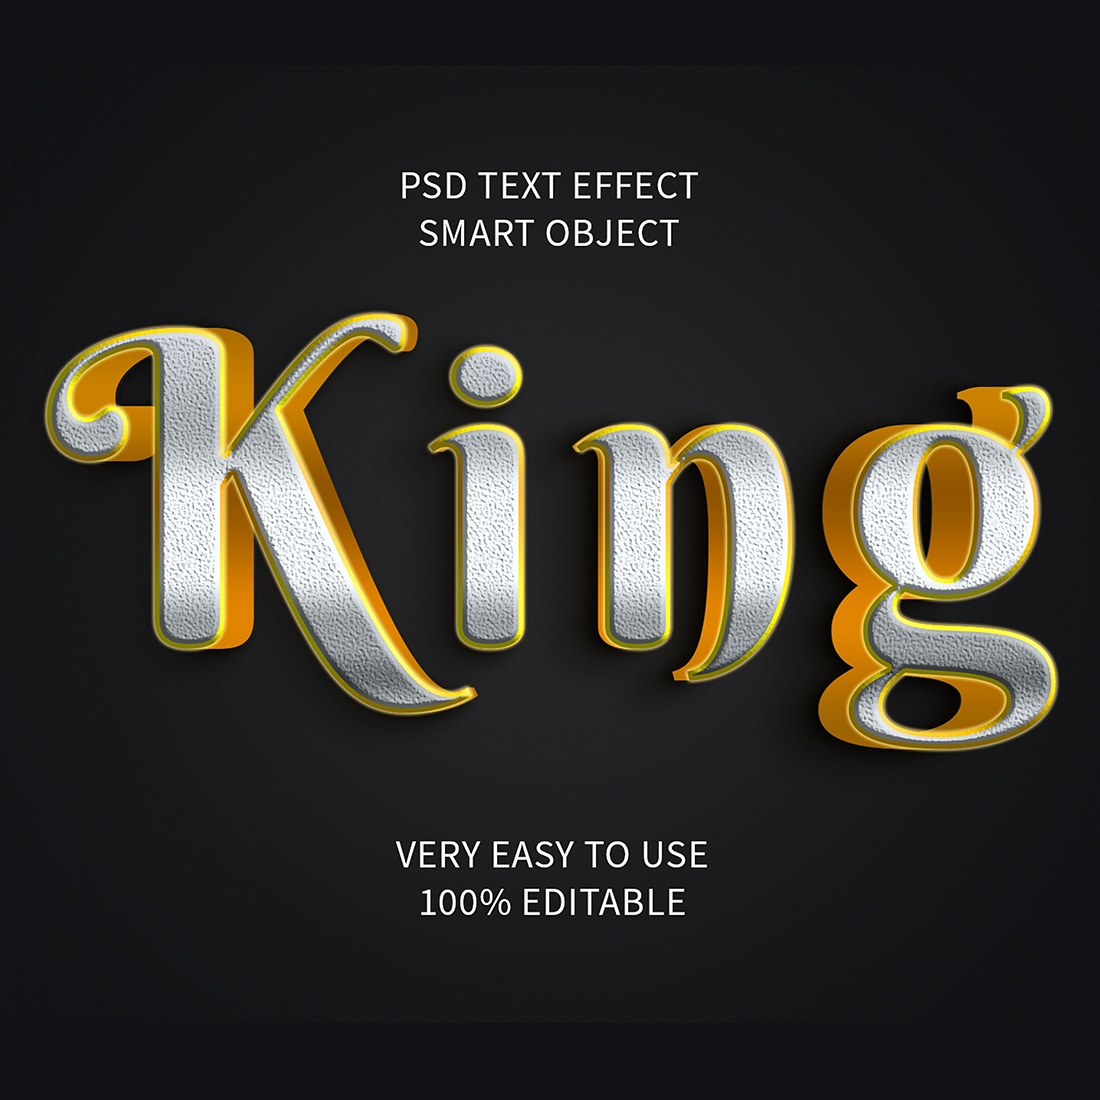 King Editable 3D Text Effect PSD cover image.